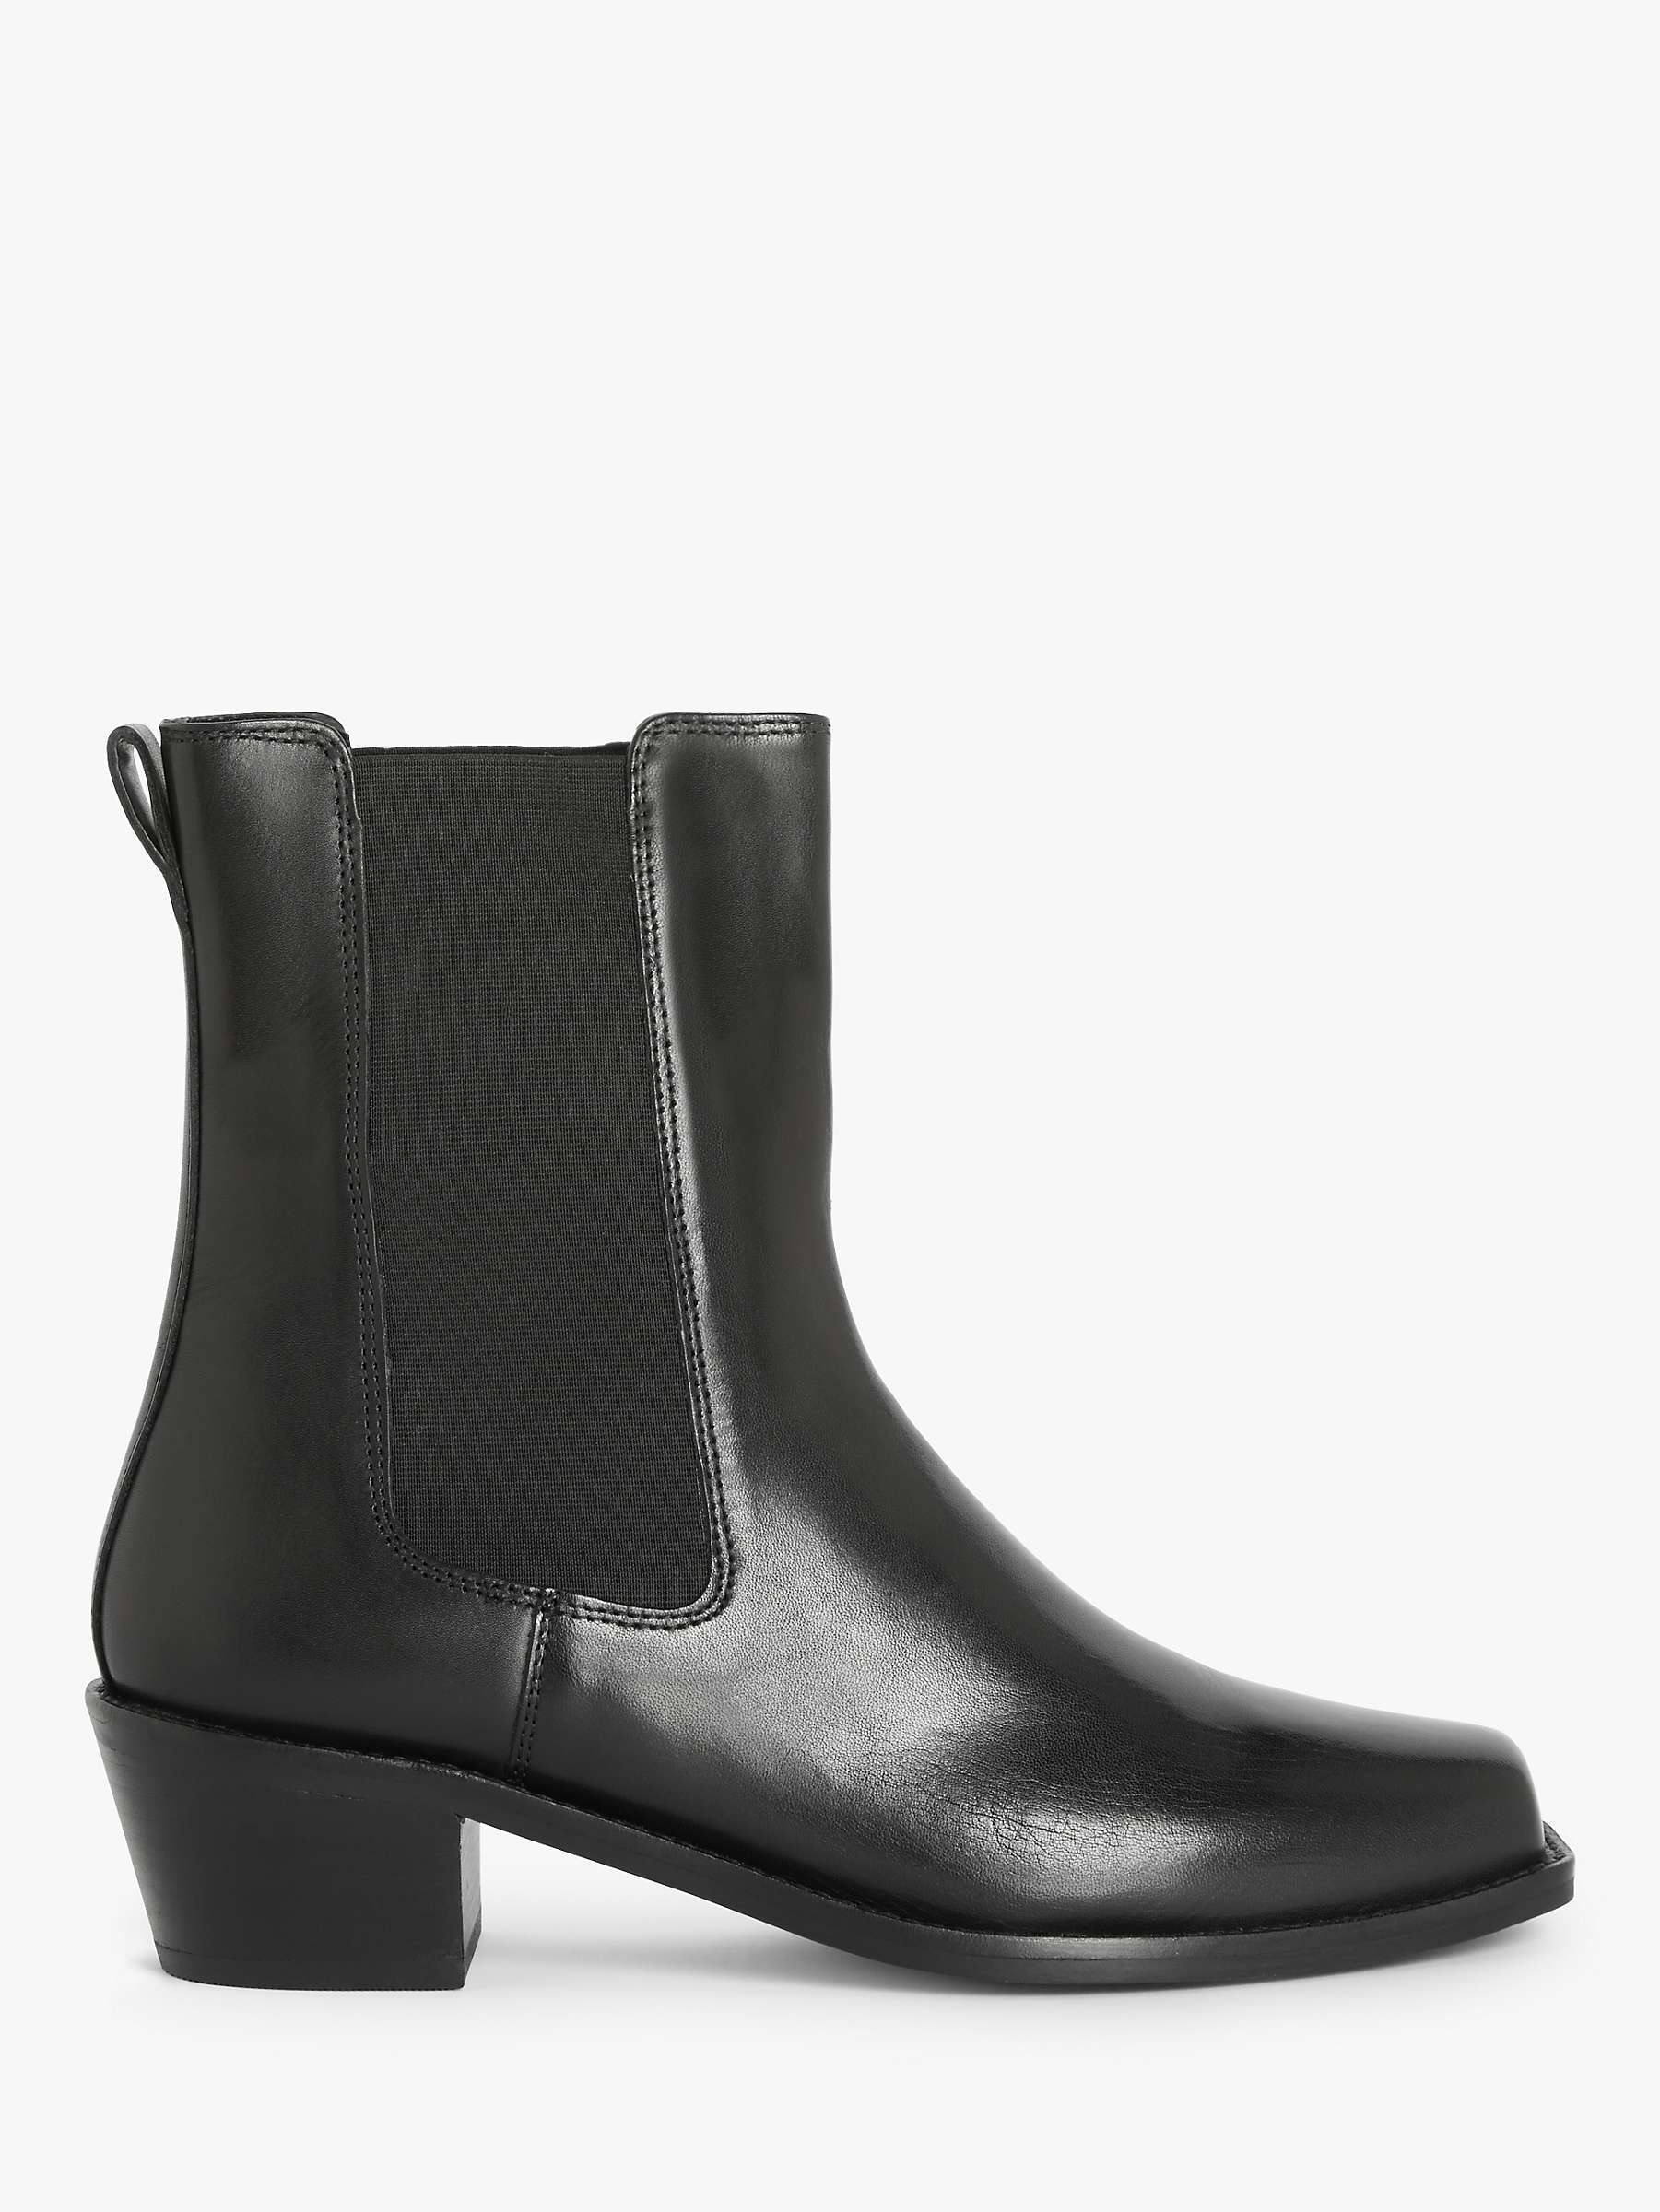 AND/OR Orson Leather Western Ankle Boots, Black at John Lewis & Partners